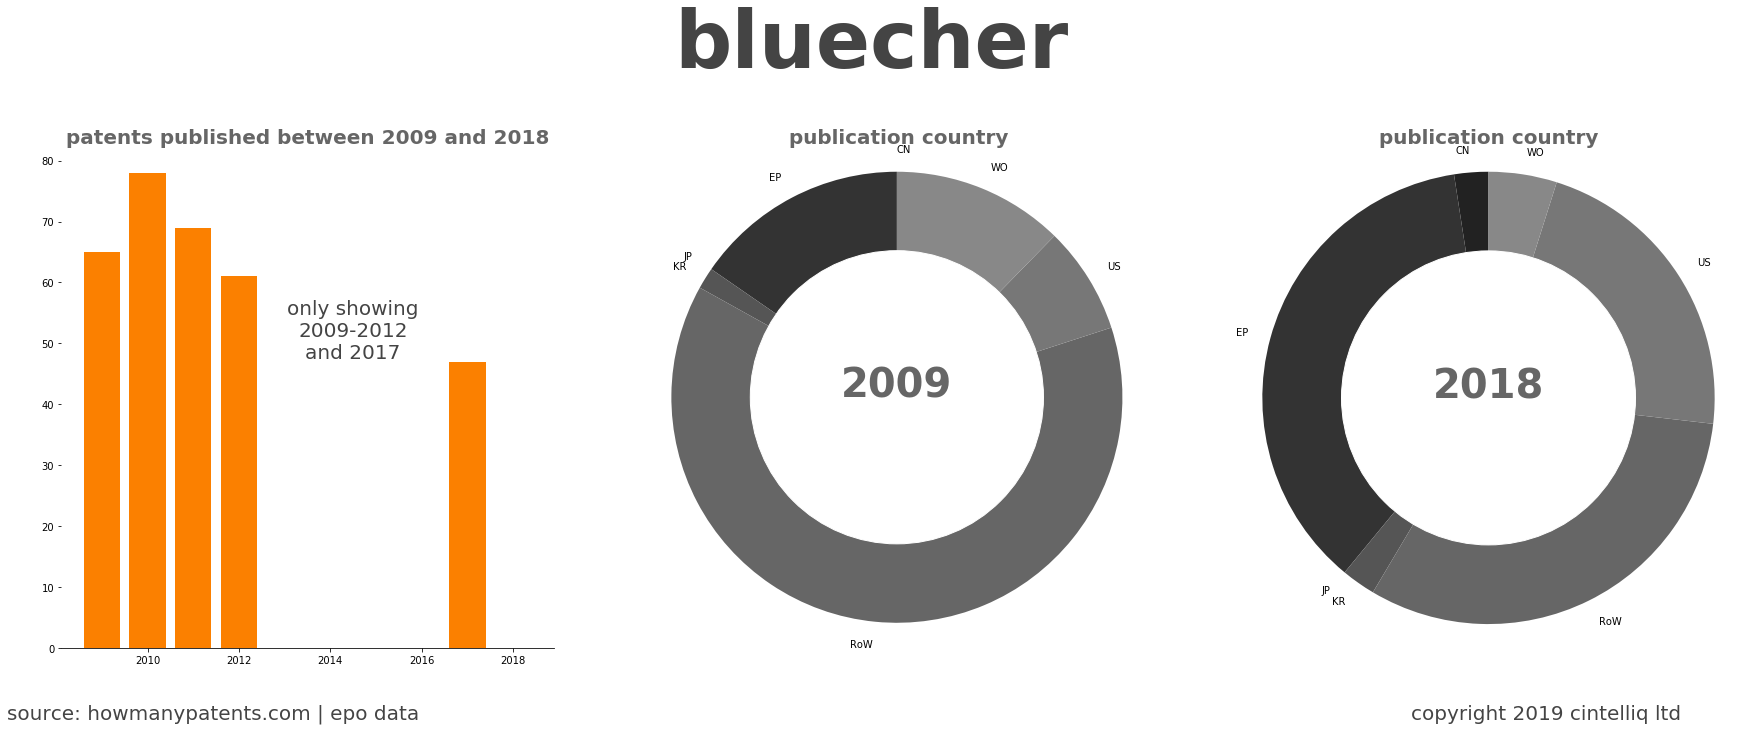 summary of patents for Bluecher